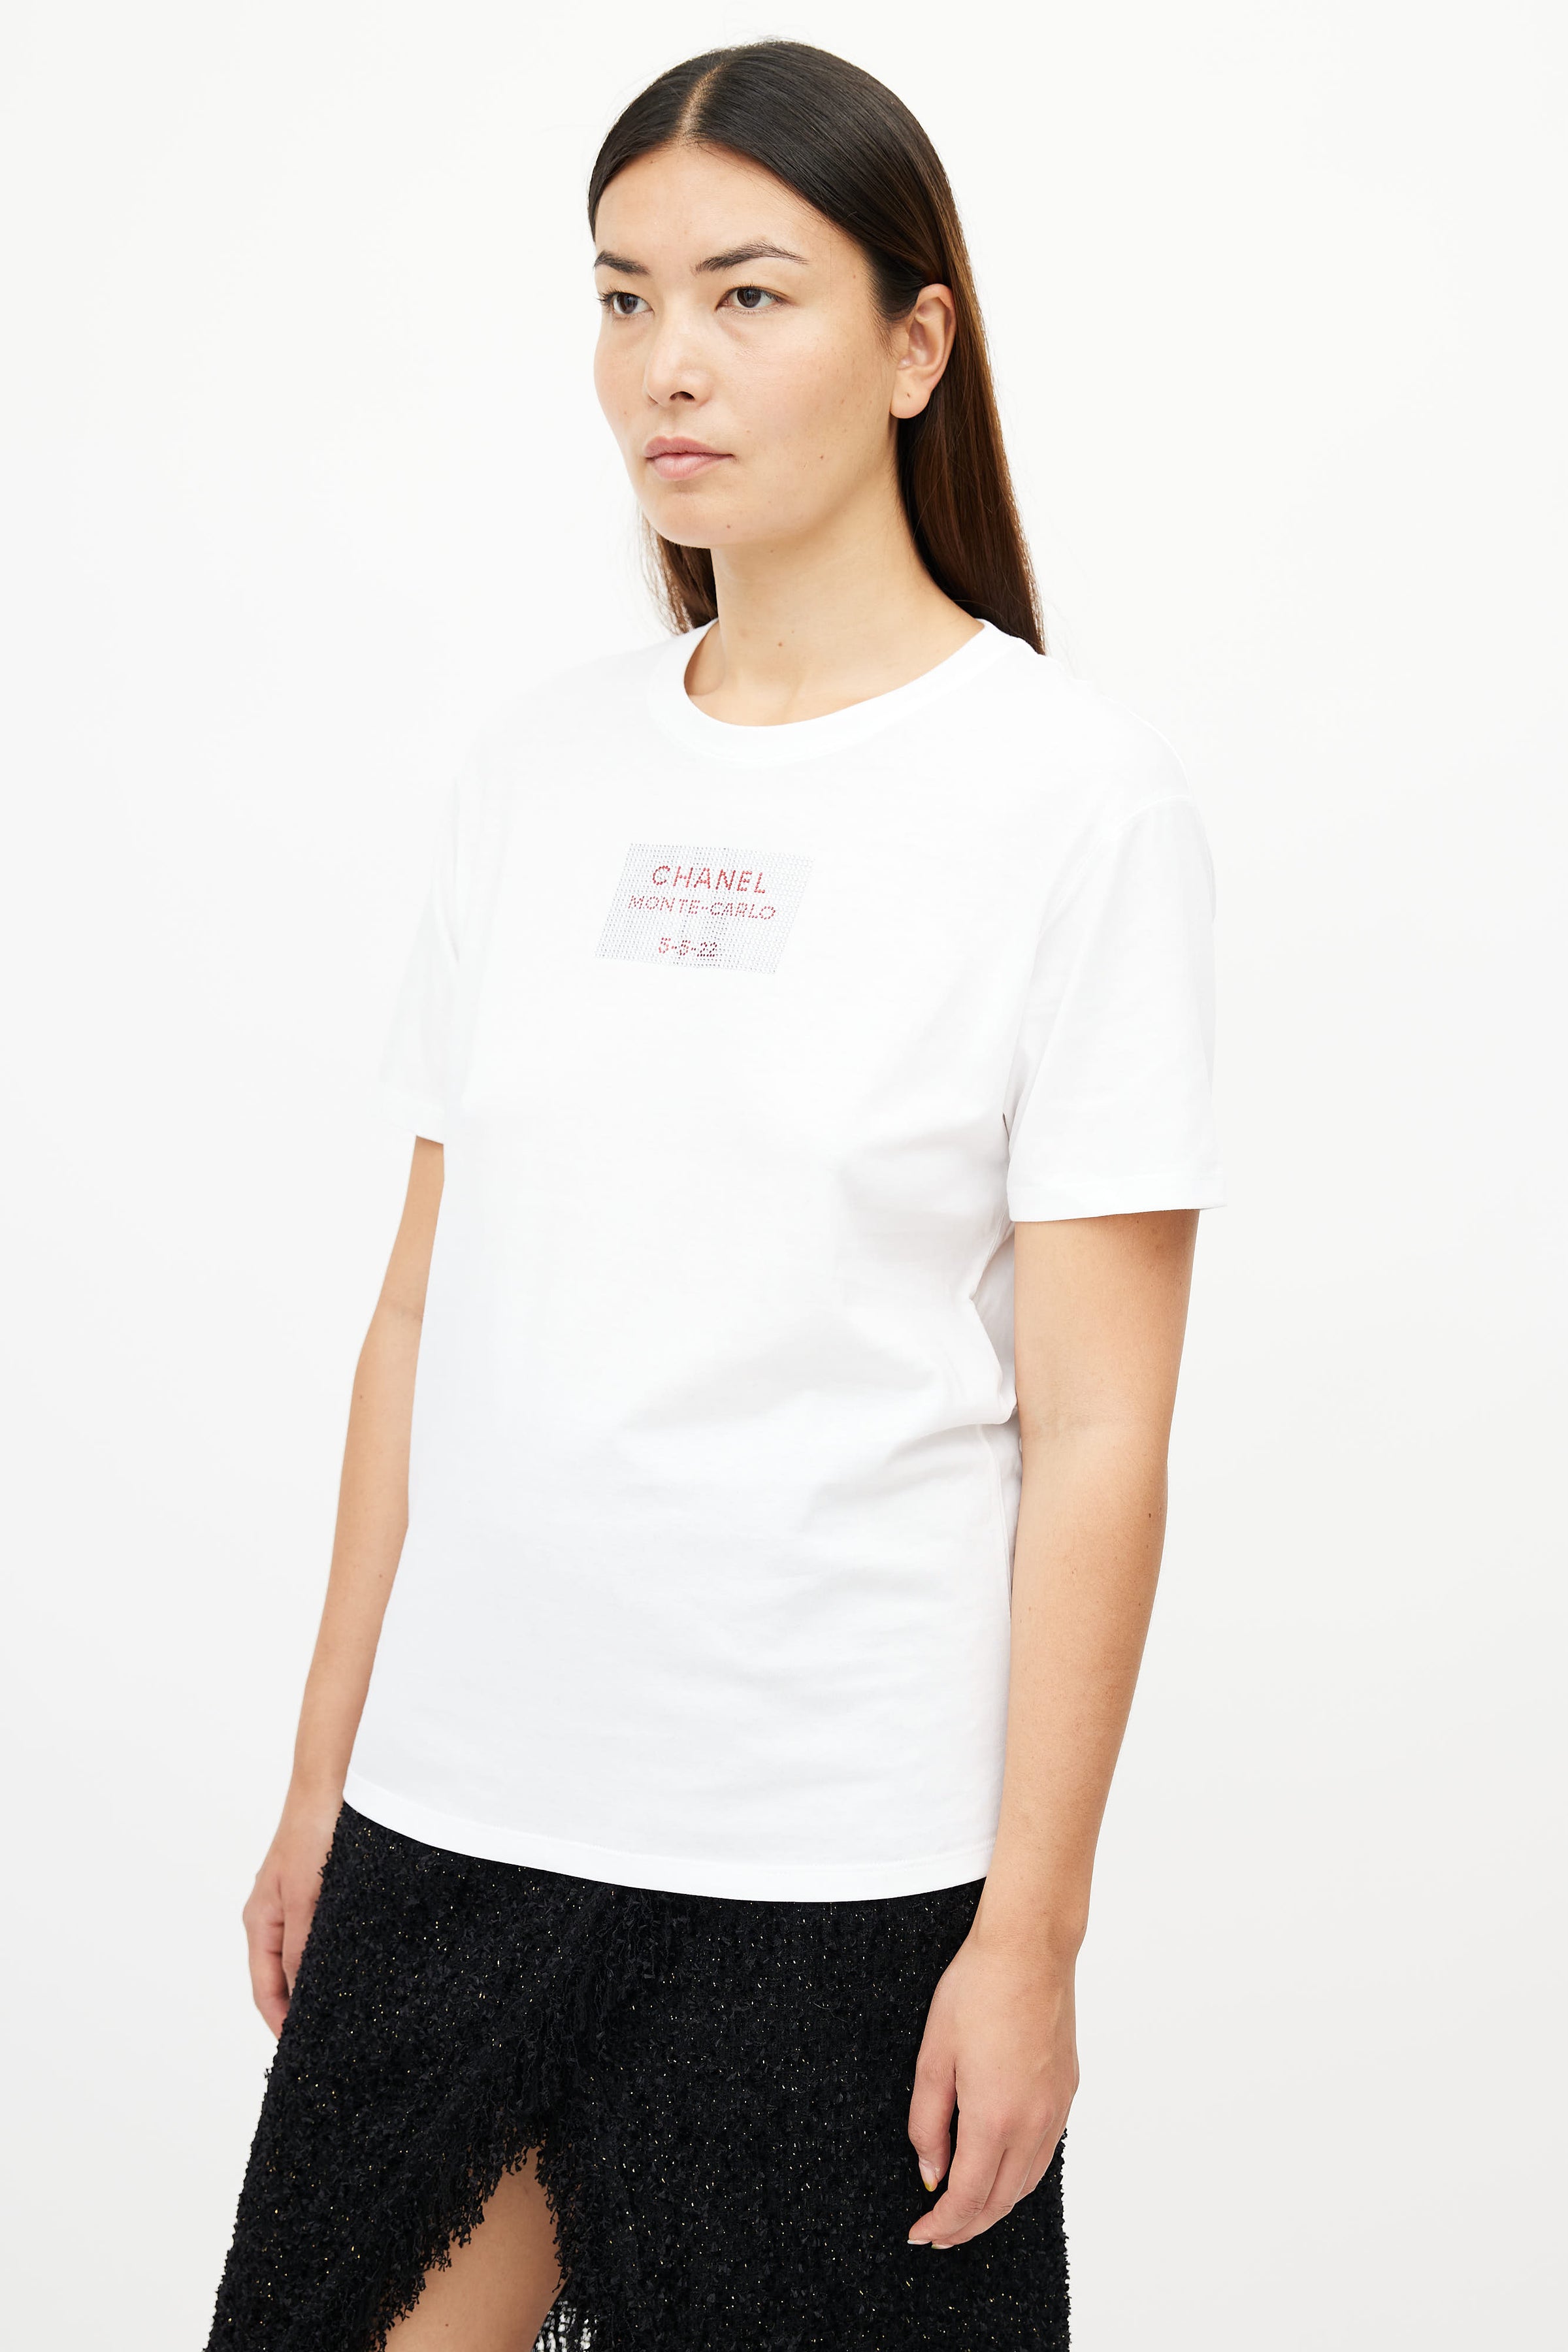 Chanel  White Embellished Monte Carlo TShirt  VSP Consignment